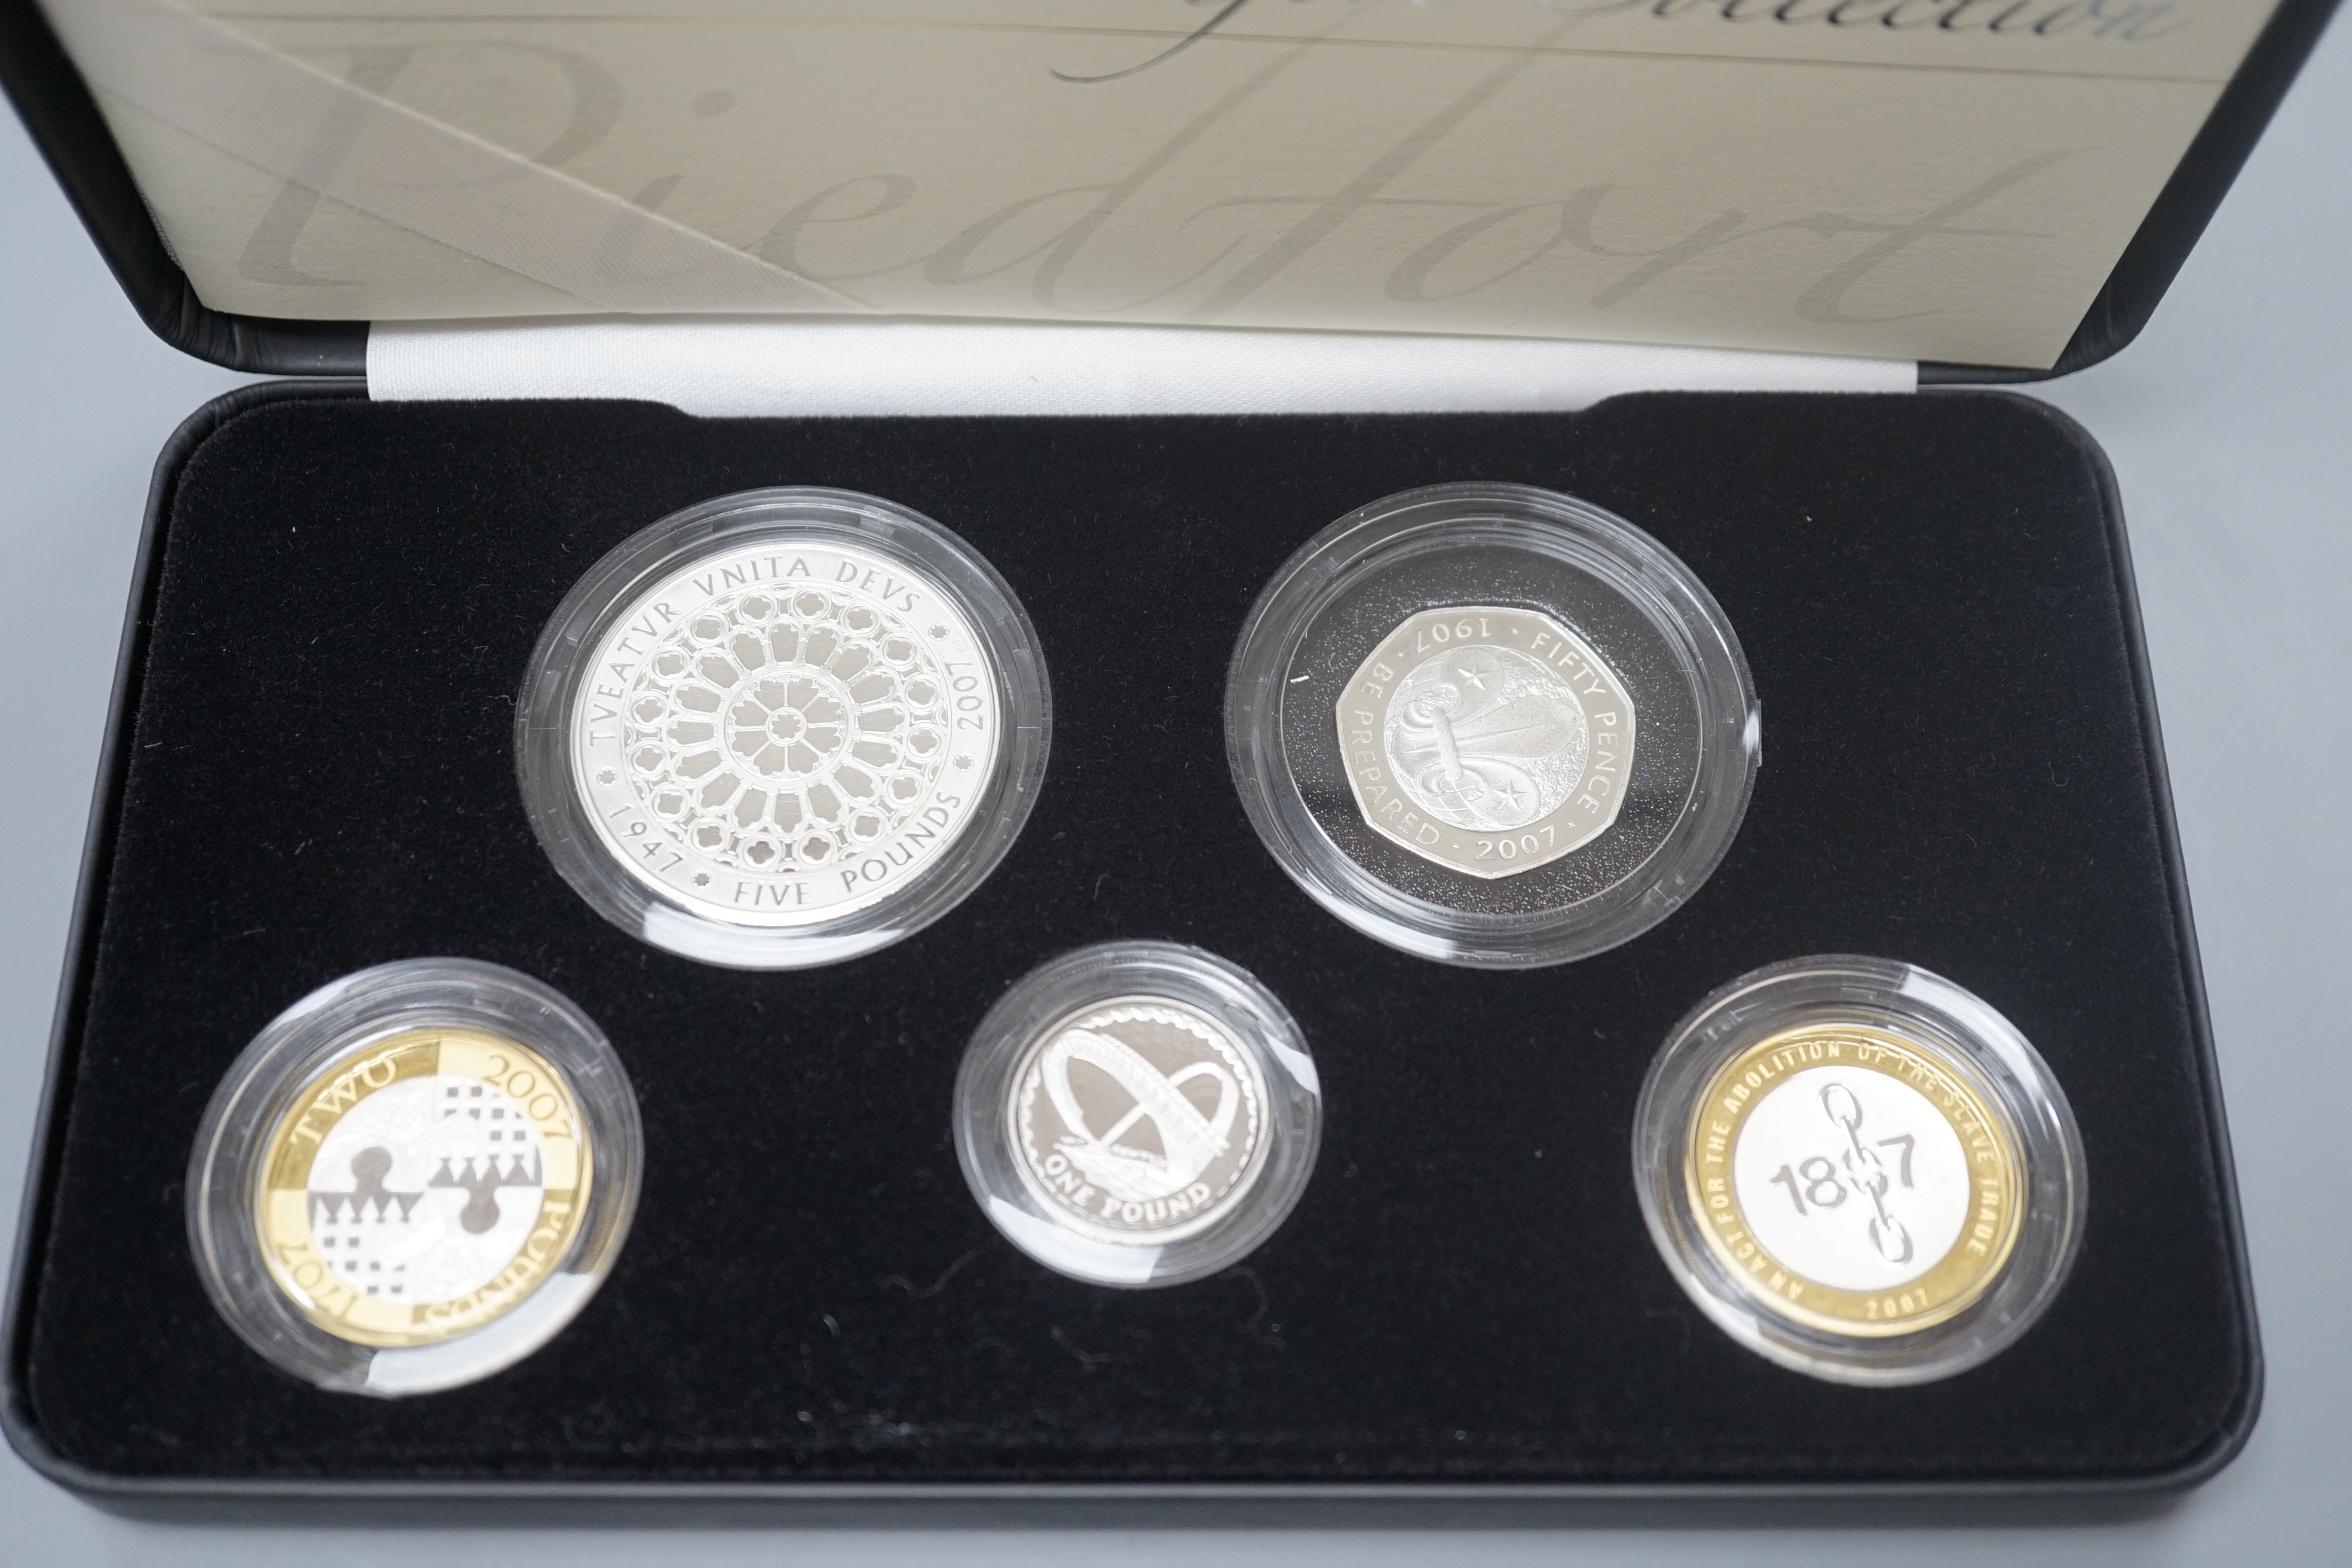 A cased Royal Mint UK Piedfort collection of silver proof coins 2007 and a cased set of four silver proof £1 coins, 2010/11